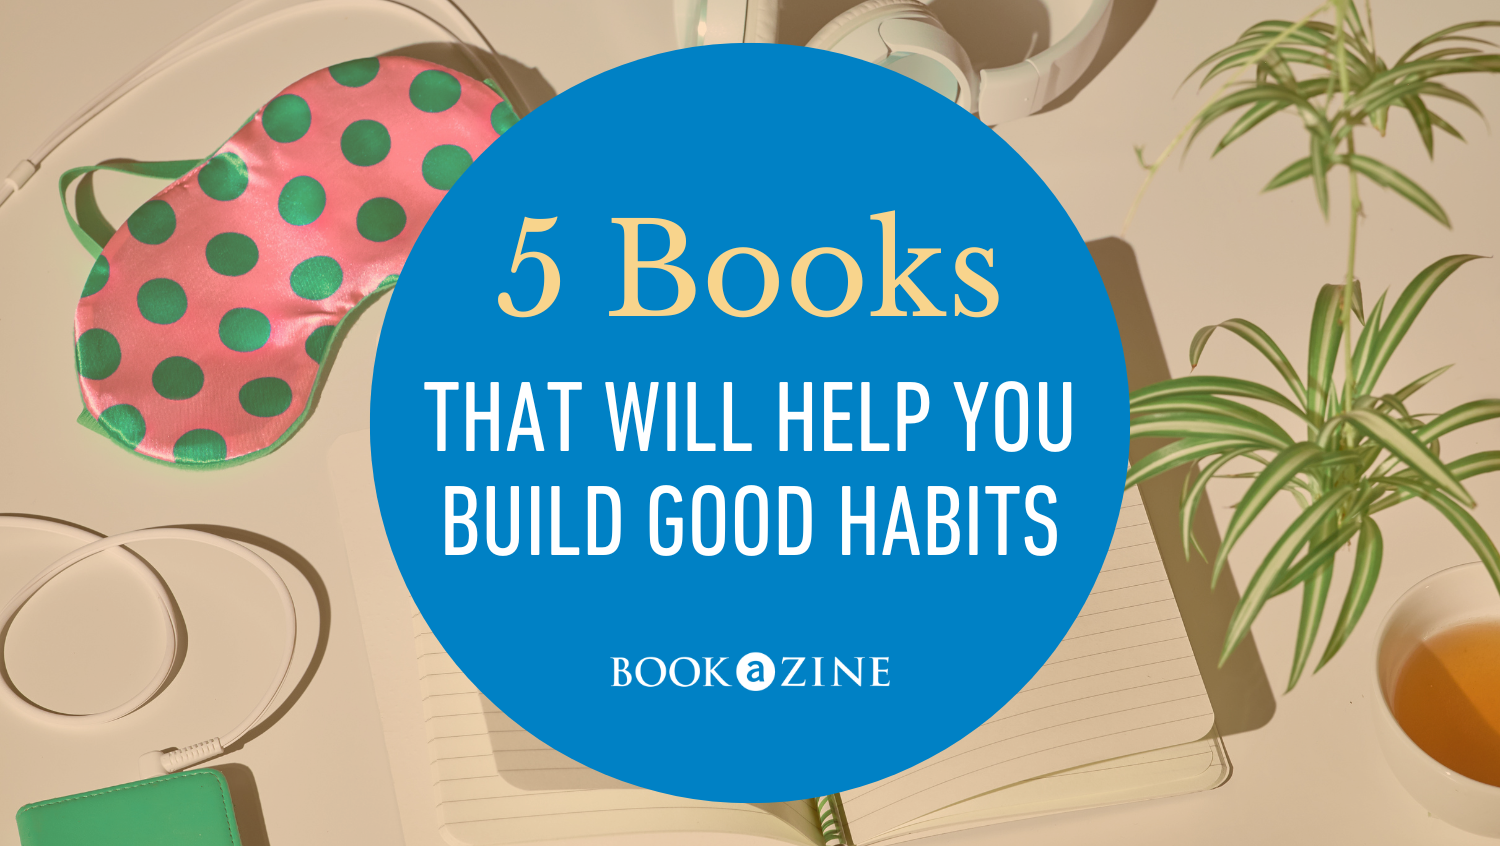 Want to Turn Over a New Leaf? Here Are 5 Books That Will Help You Build Good Habits